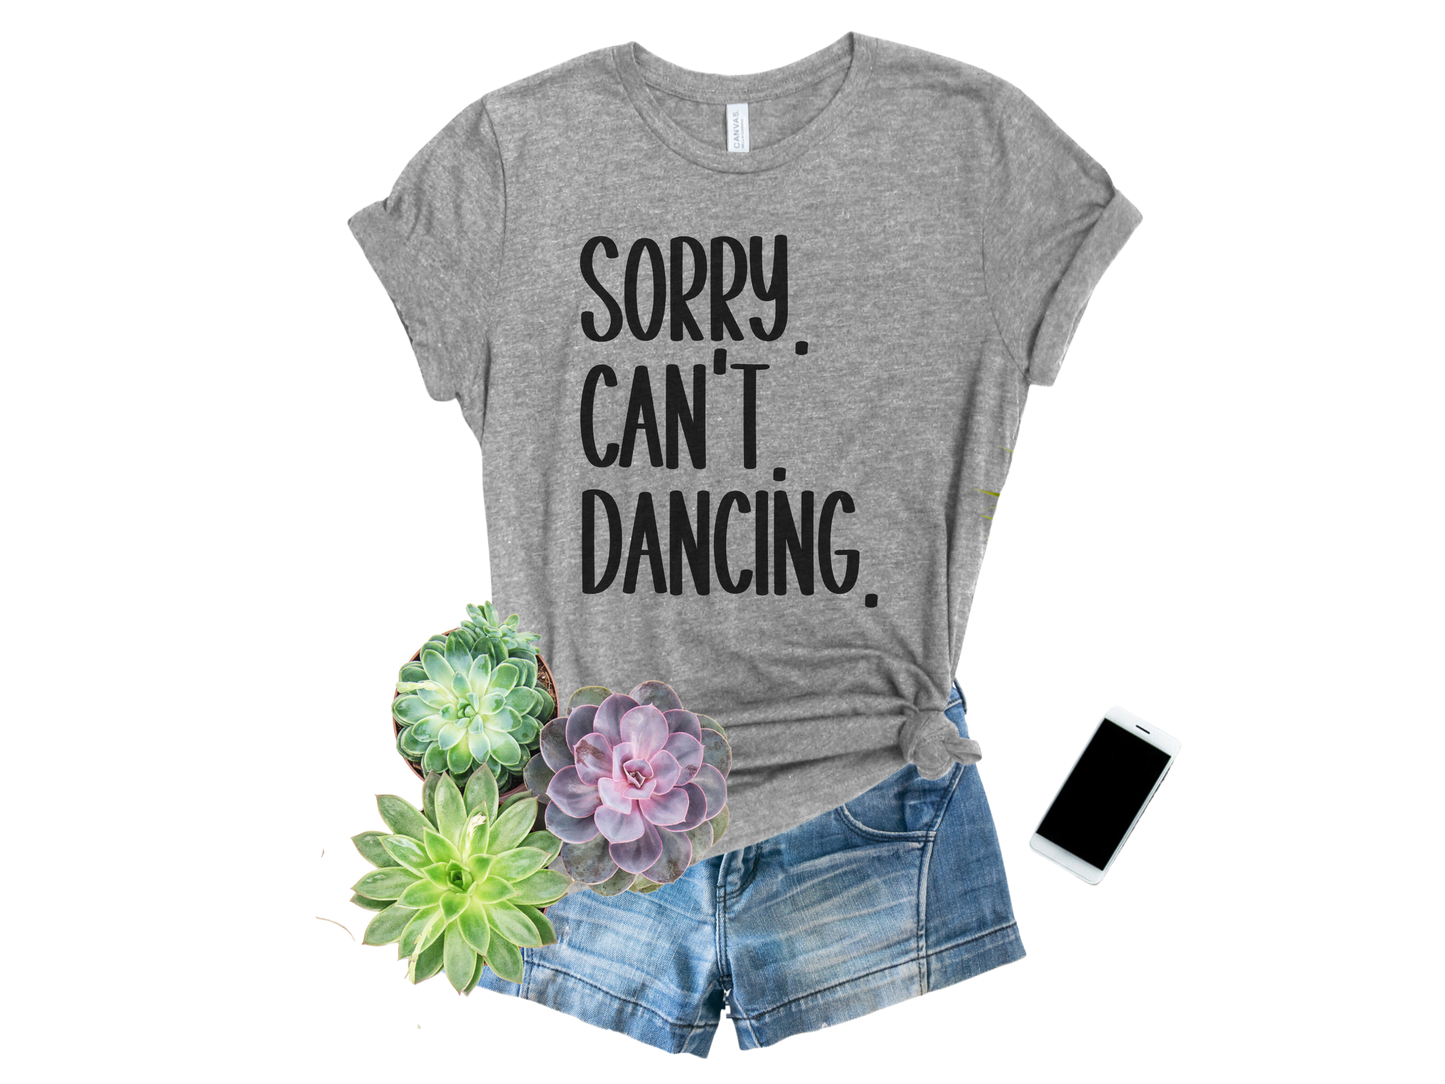 Sorry. Can't. Dancing.